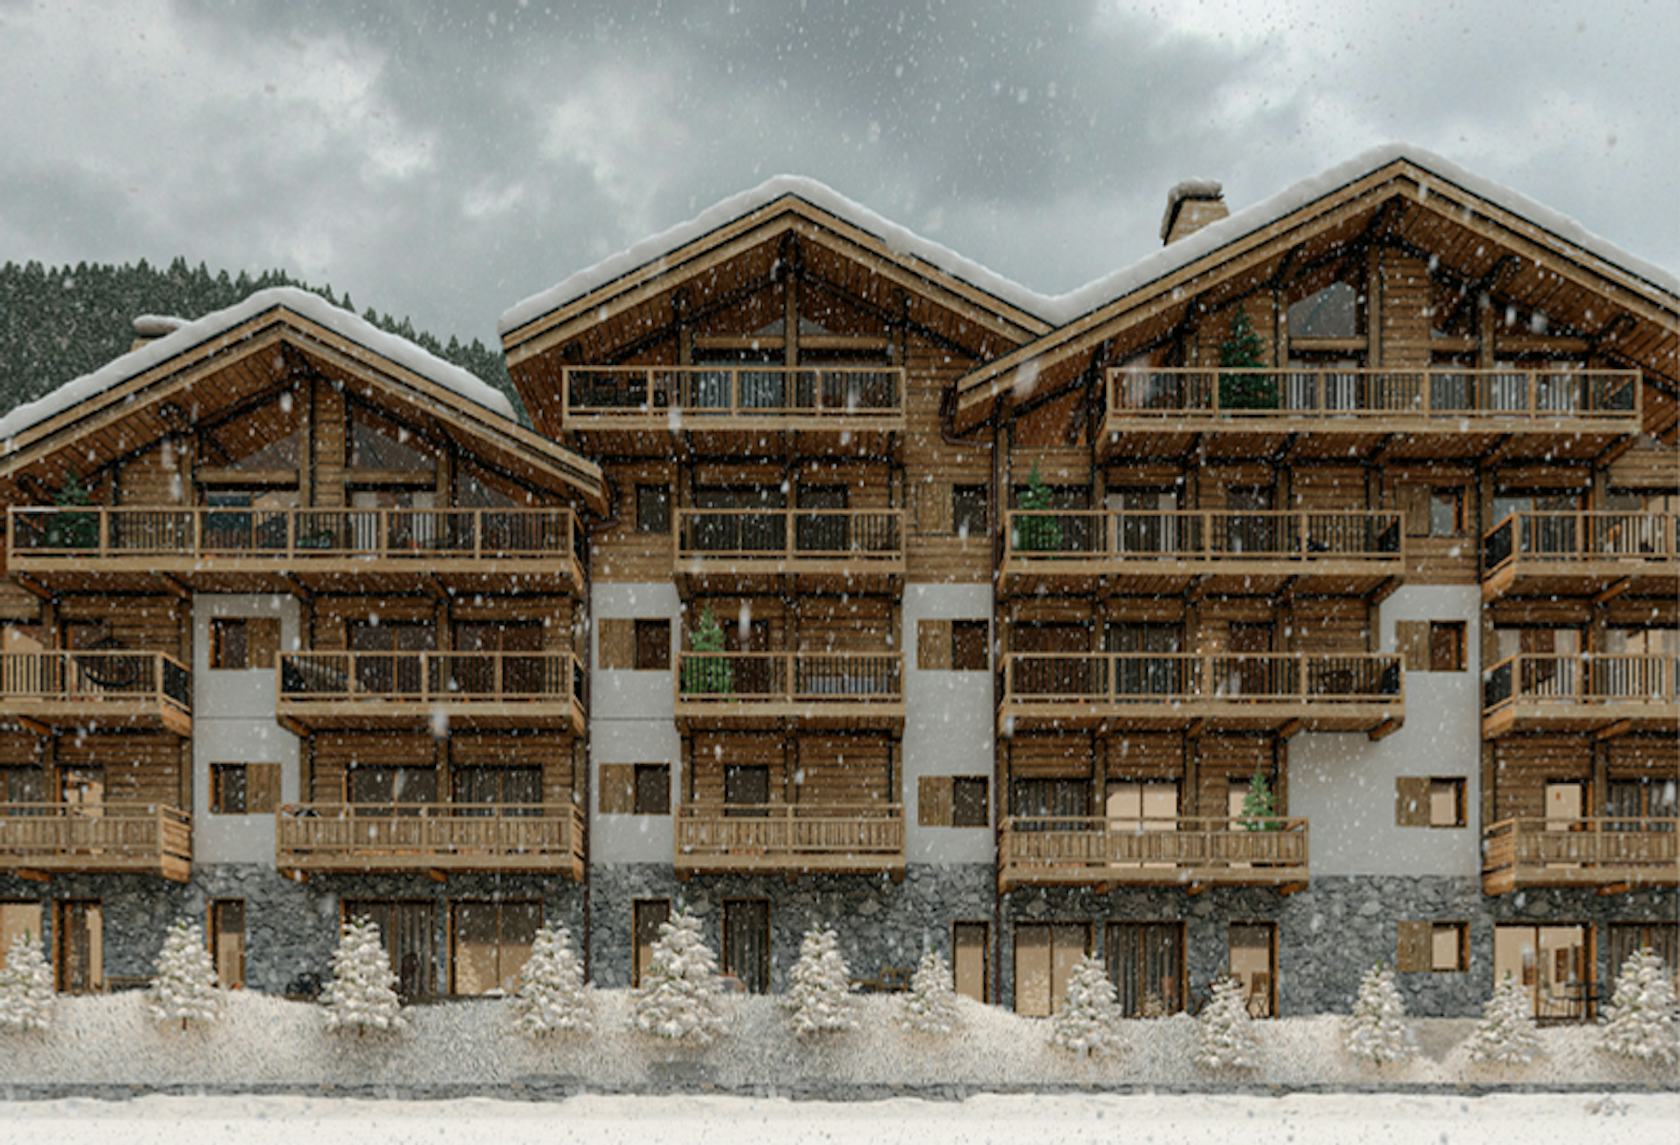 Luxury hotel flats in Tignes, a winter sports paradise